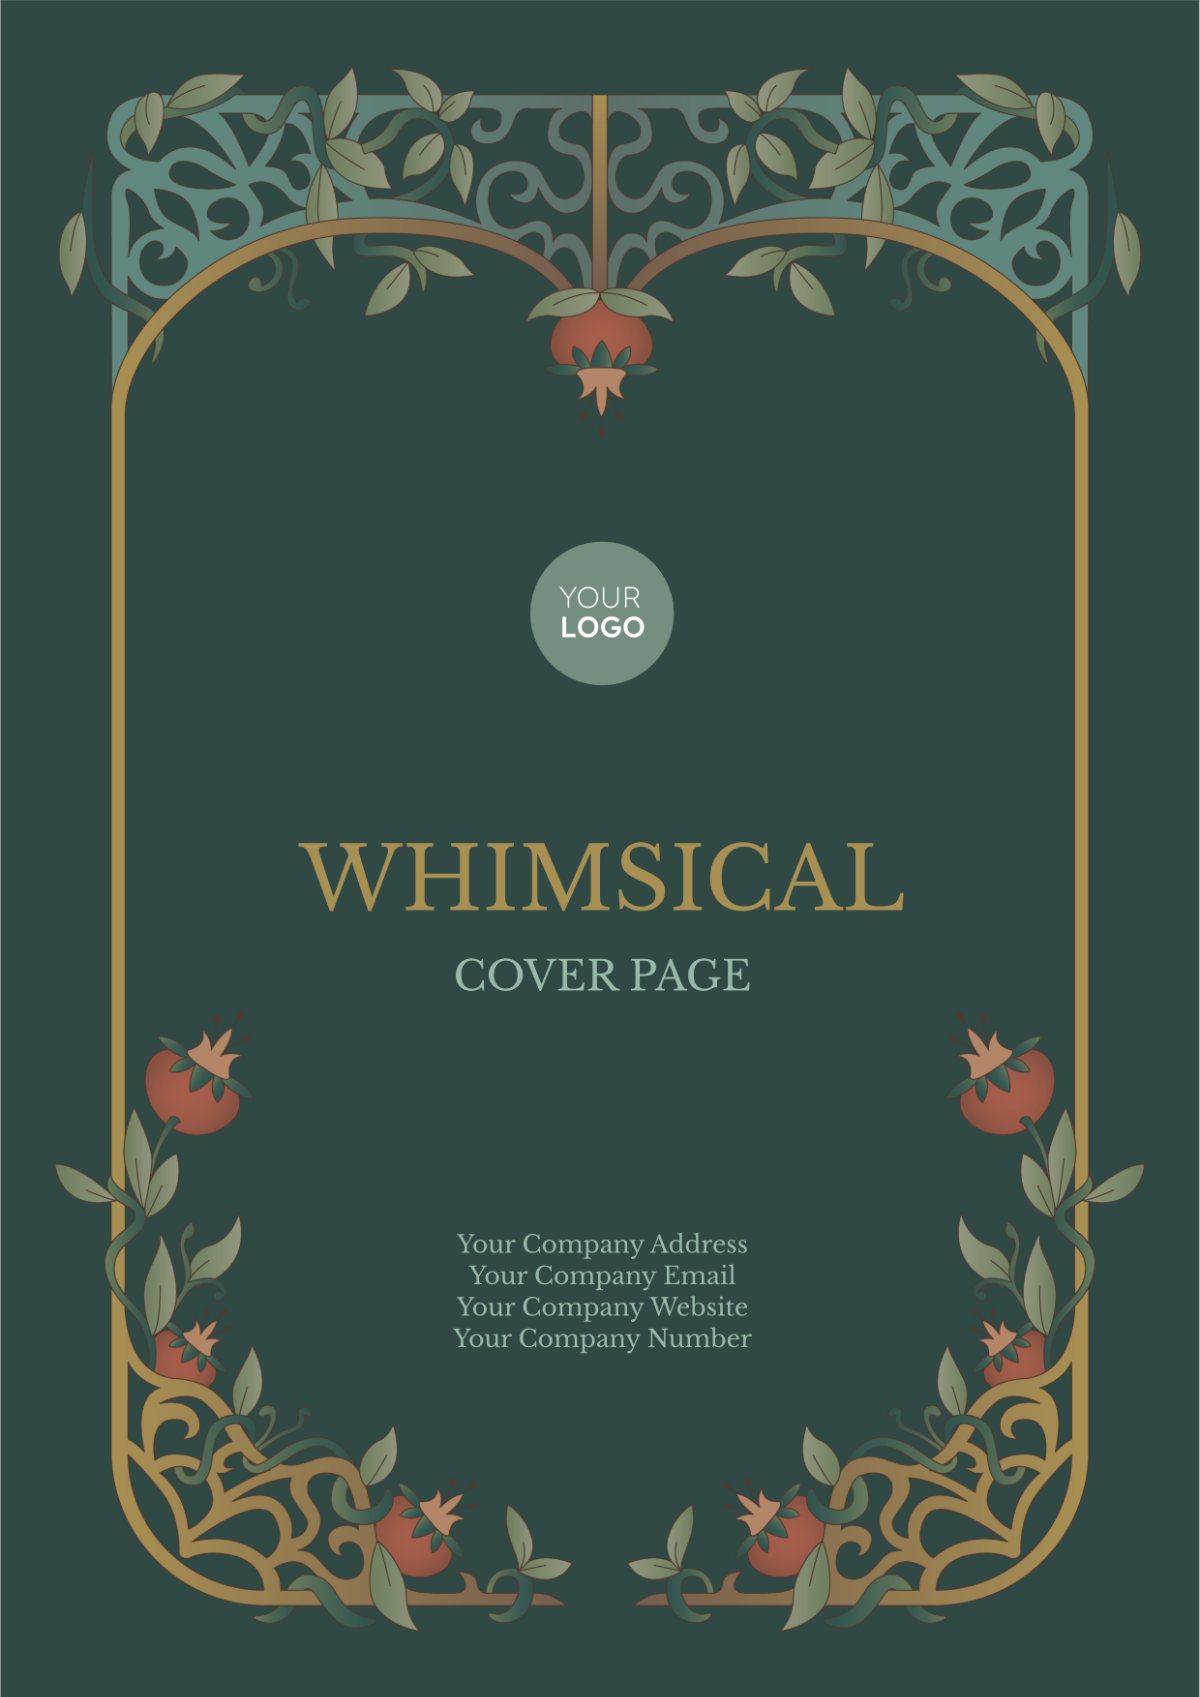 Whimsical Half Title Cover Page